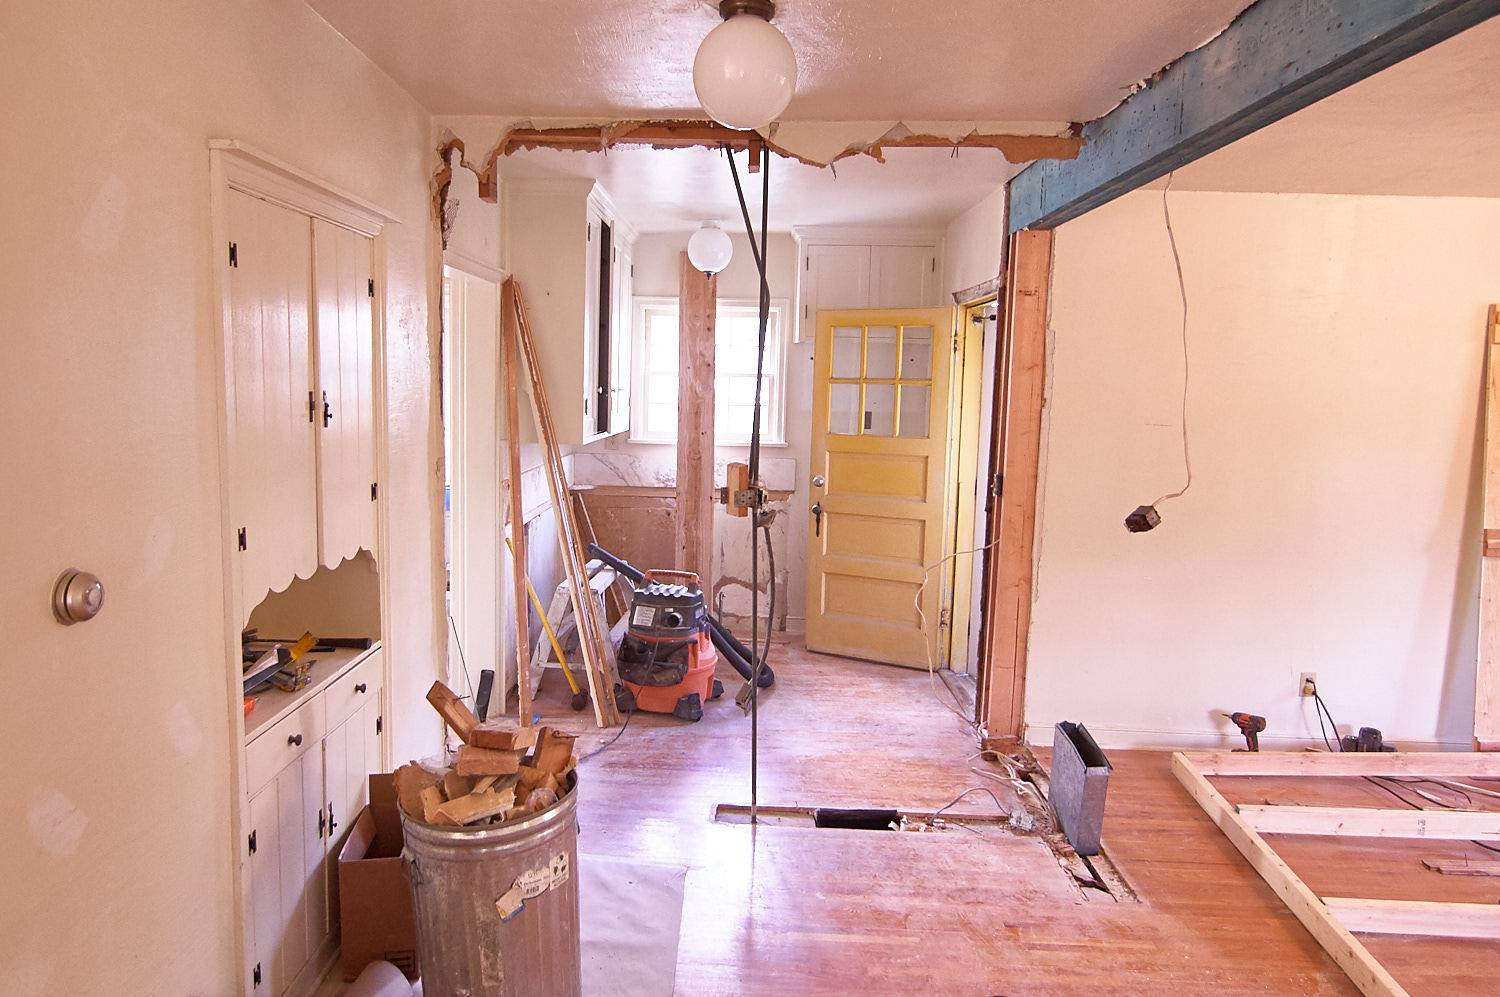 A room under construction with a full silver garbage can of wood pieces.